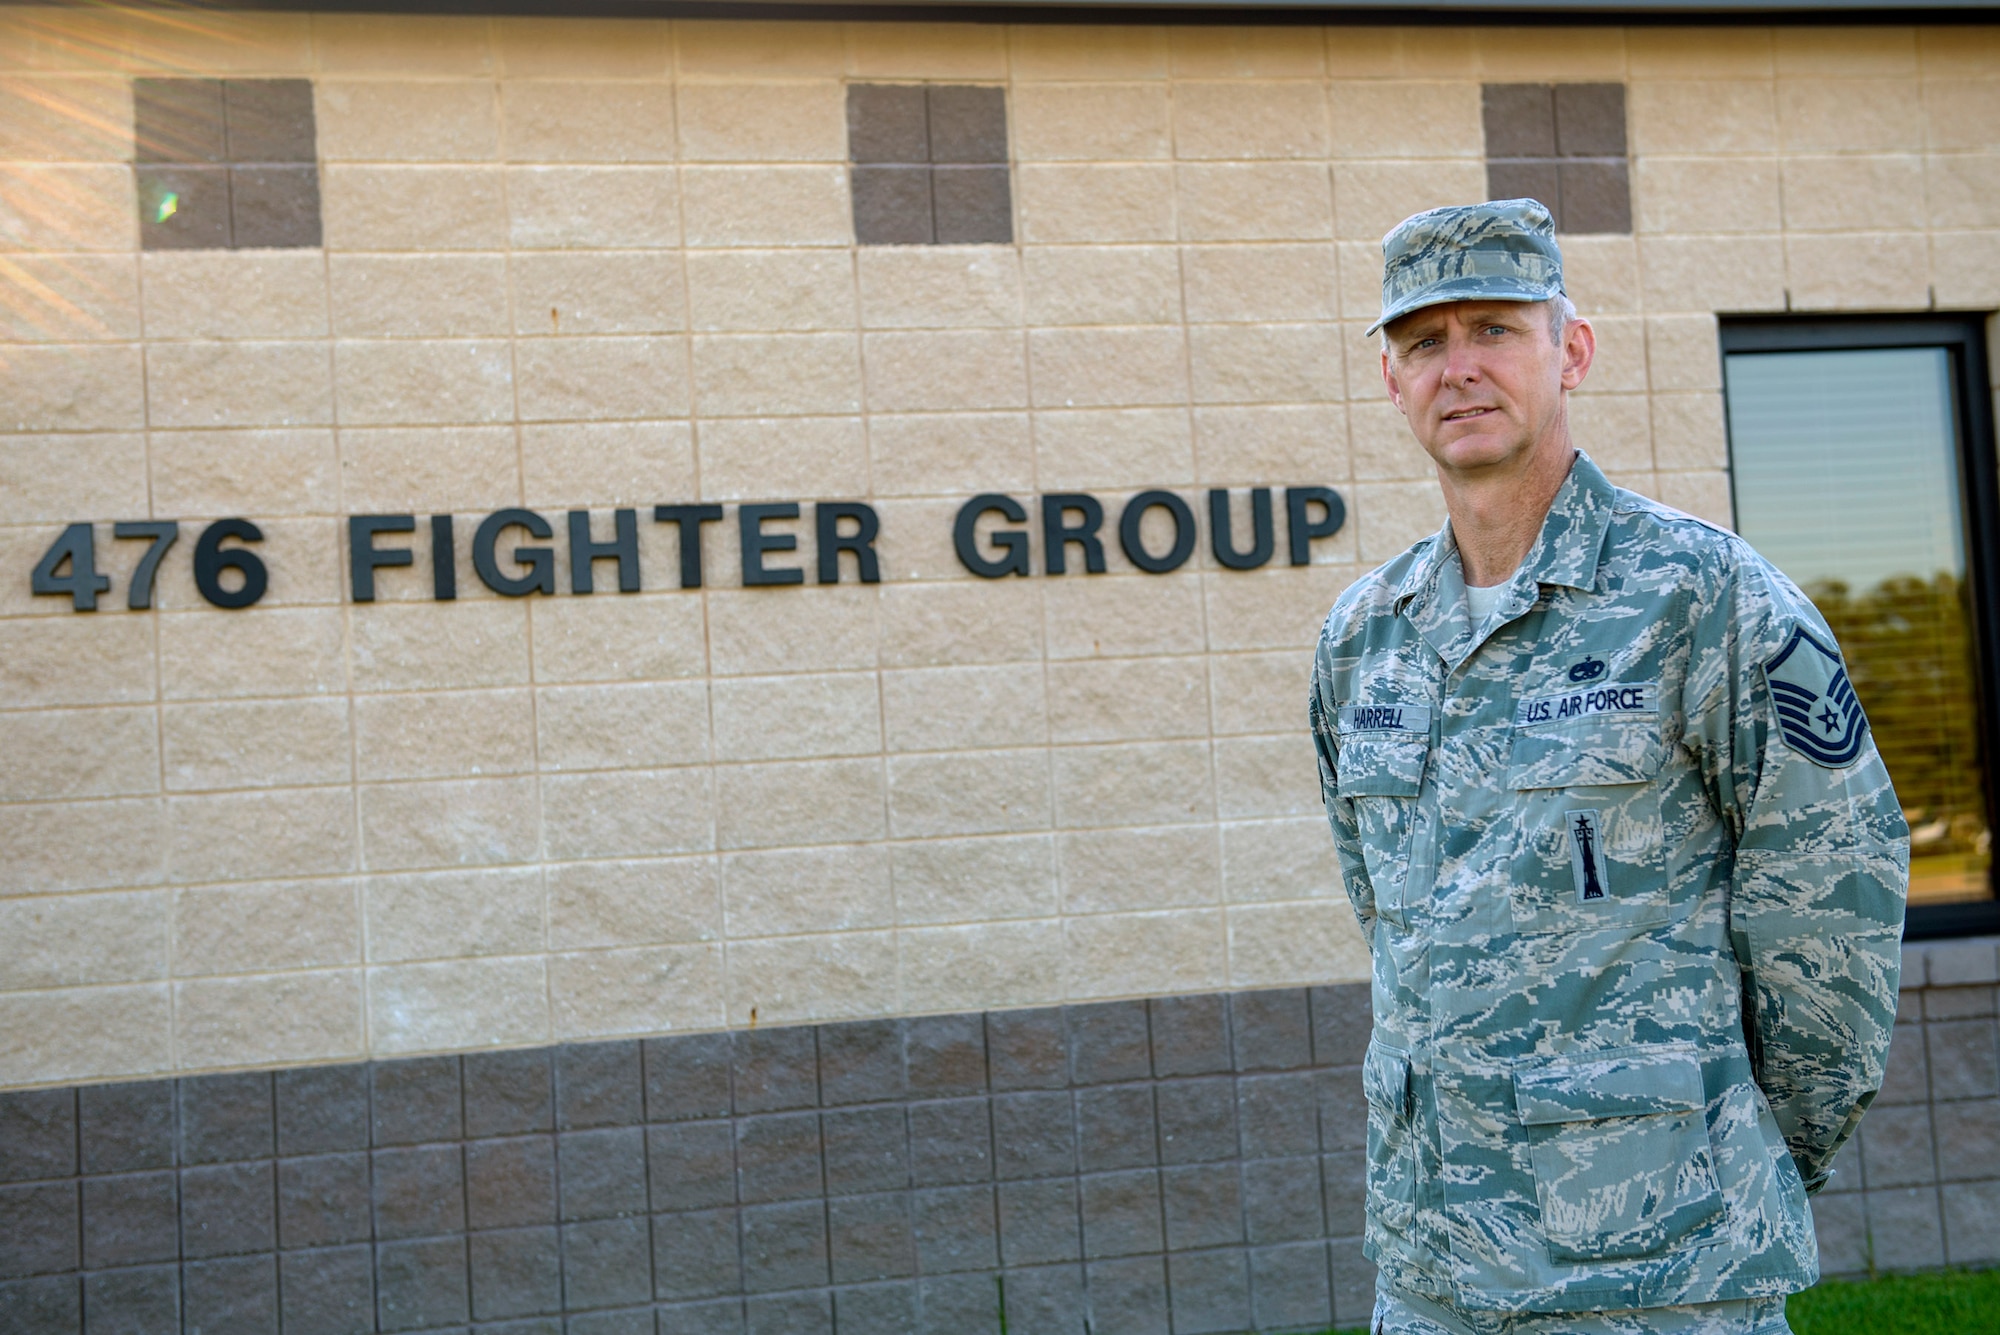 U.S. Air Force Reserve Master Sgt. Rusty Harrell, 476th Fighter Group career assistance advisor, poses in front of the 476th FG building, July 14, 2016, at Moody Air Force Base, Ga. Once an active duty armament systems technician, Harrell now holds the responsibility of guiding approximately 240 Airmen from the 476th FG through their career paths and future endeavors. (U.S. Air Force photo by Airman 1st Class Greg Nash)